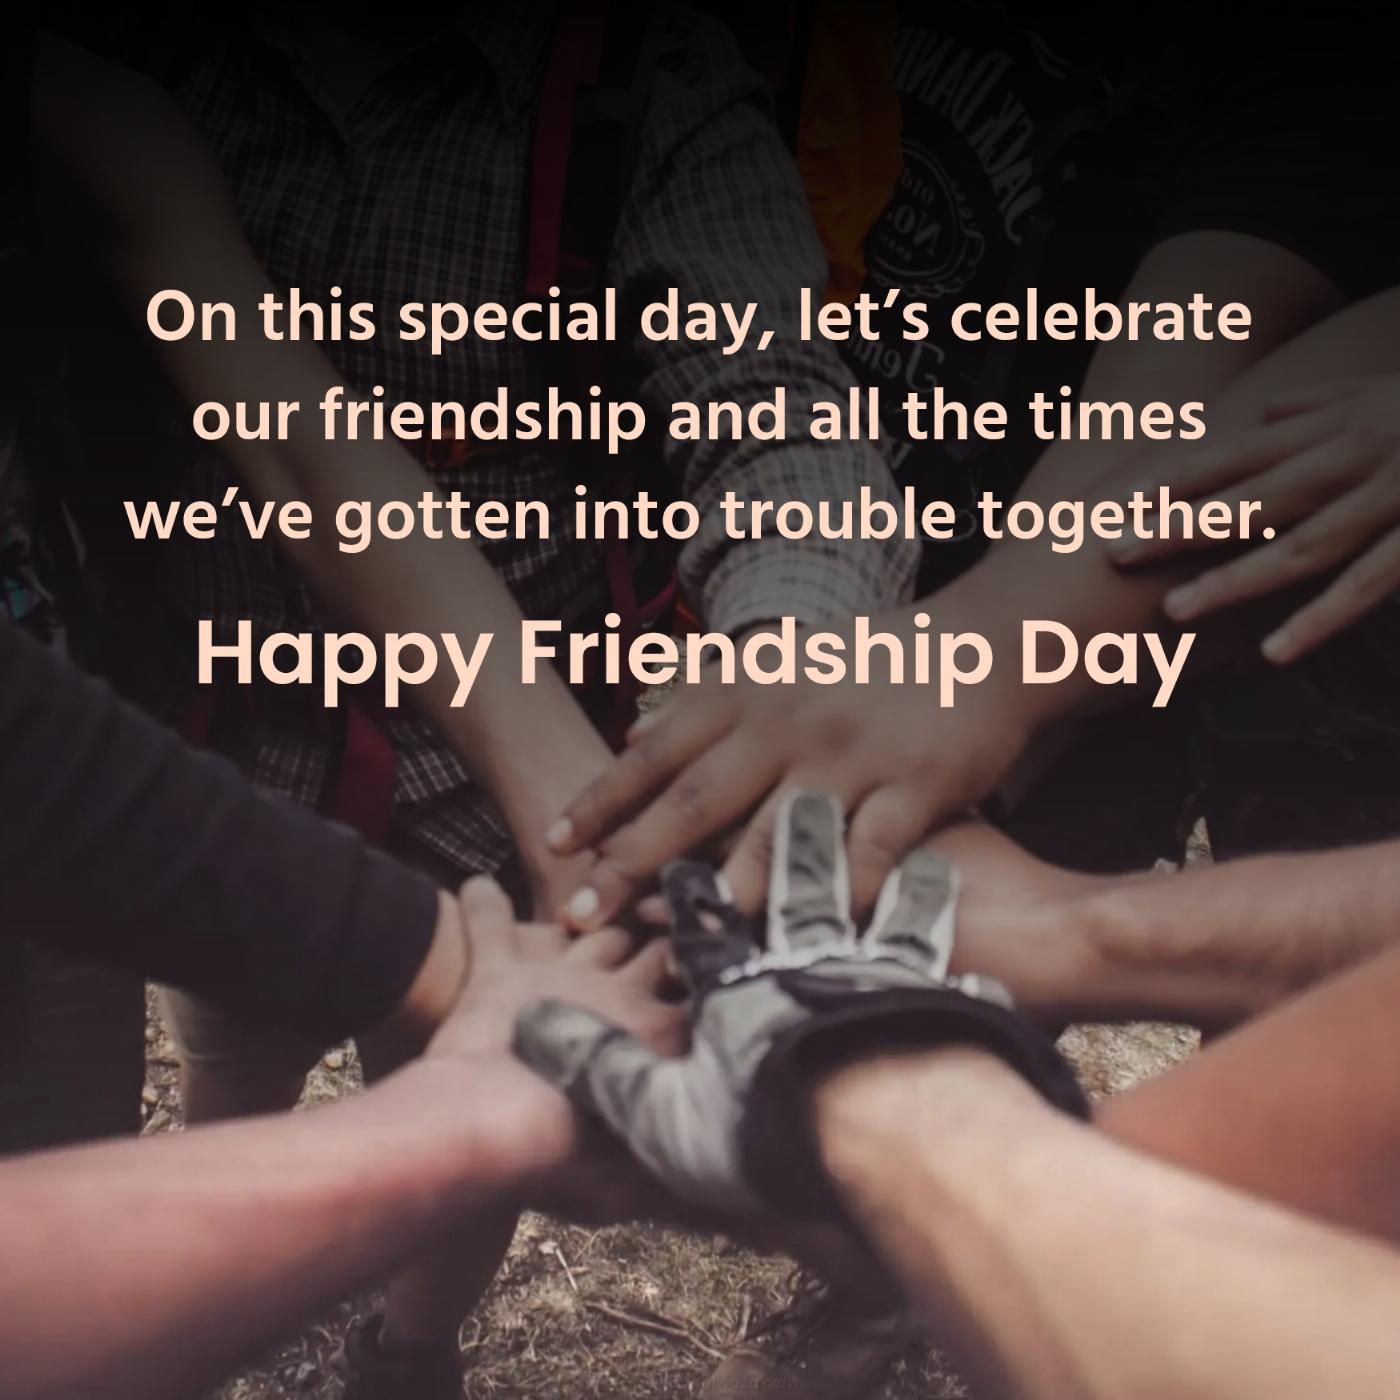 On this special day lets celebrate our friendship and all the times